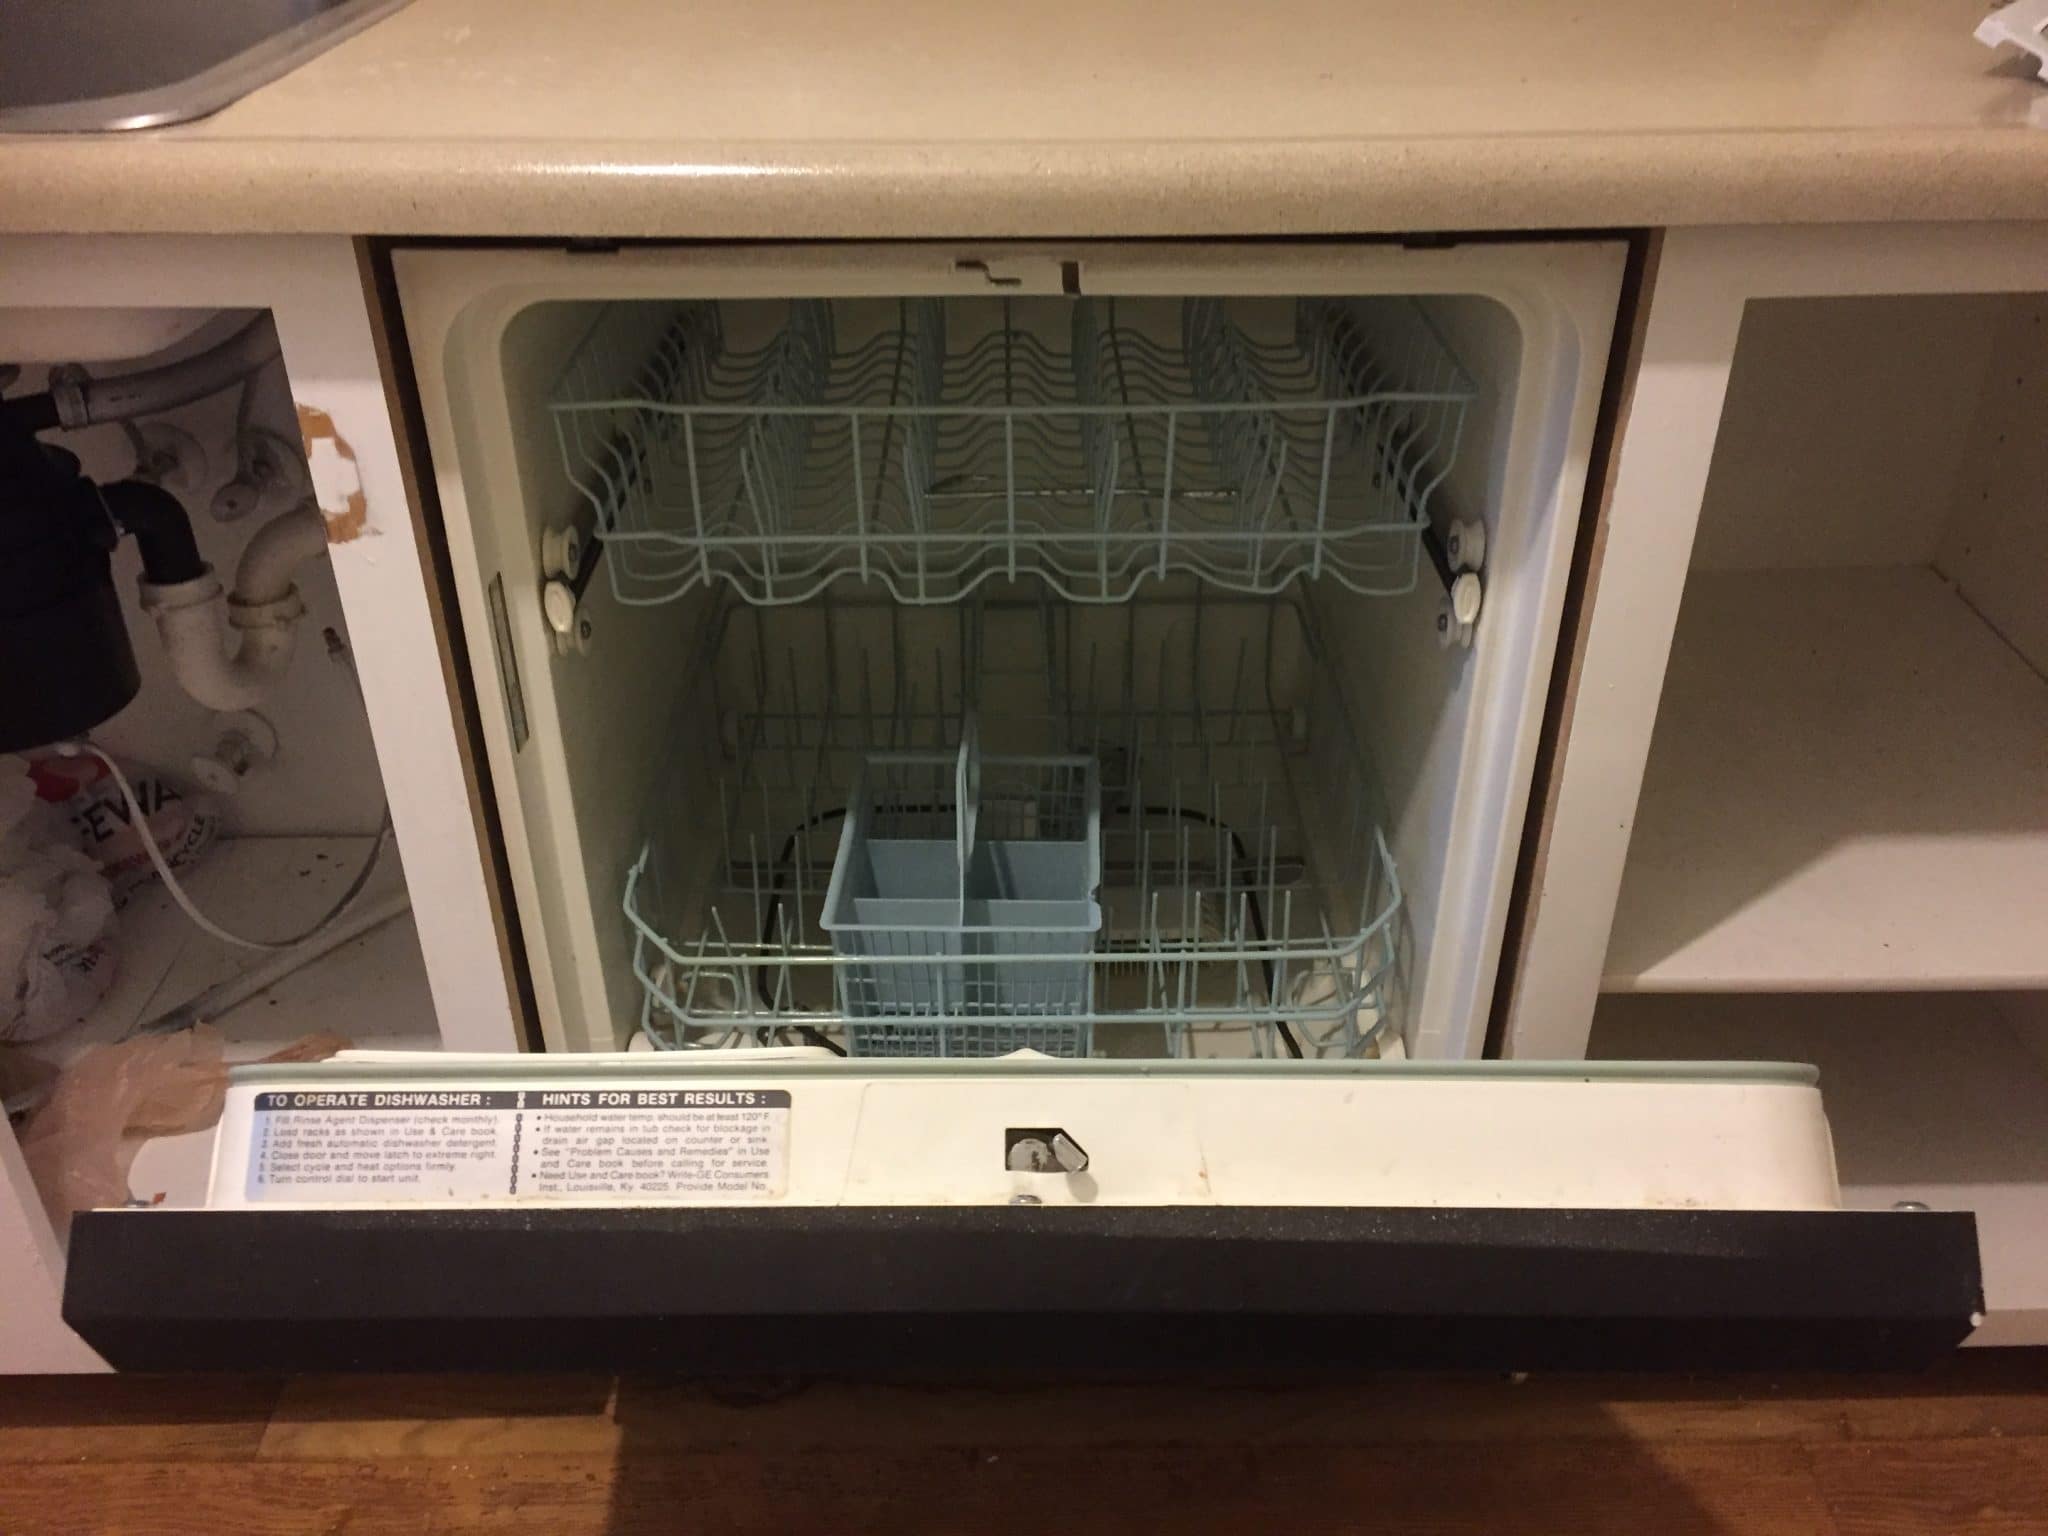 https://homeliftup.com/wp-content/uploads/2020/05/dishwasher-space-requirements-scaled.jpg